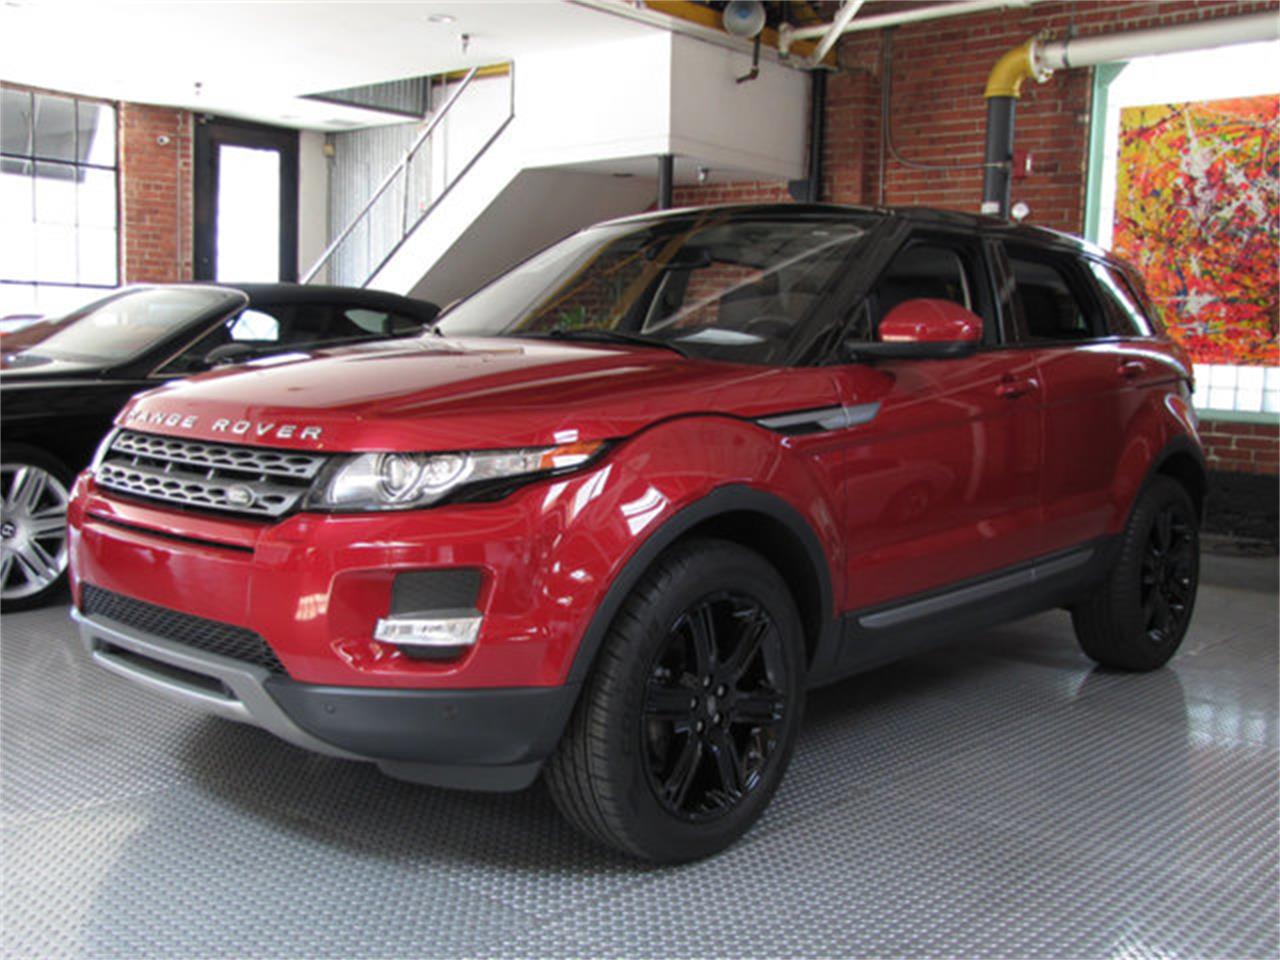 Range Rover Evoque For Sale Red Interior  . Unless Otherwise Noted, All Vehicles Shown On This Website Are Offered For Sale By Licensed Motor Vehicle Dealers.